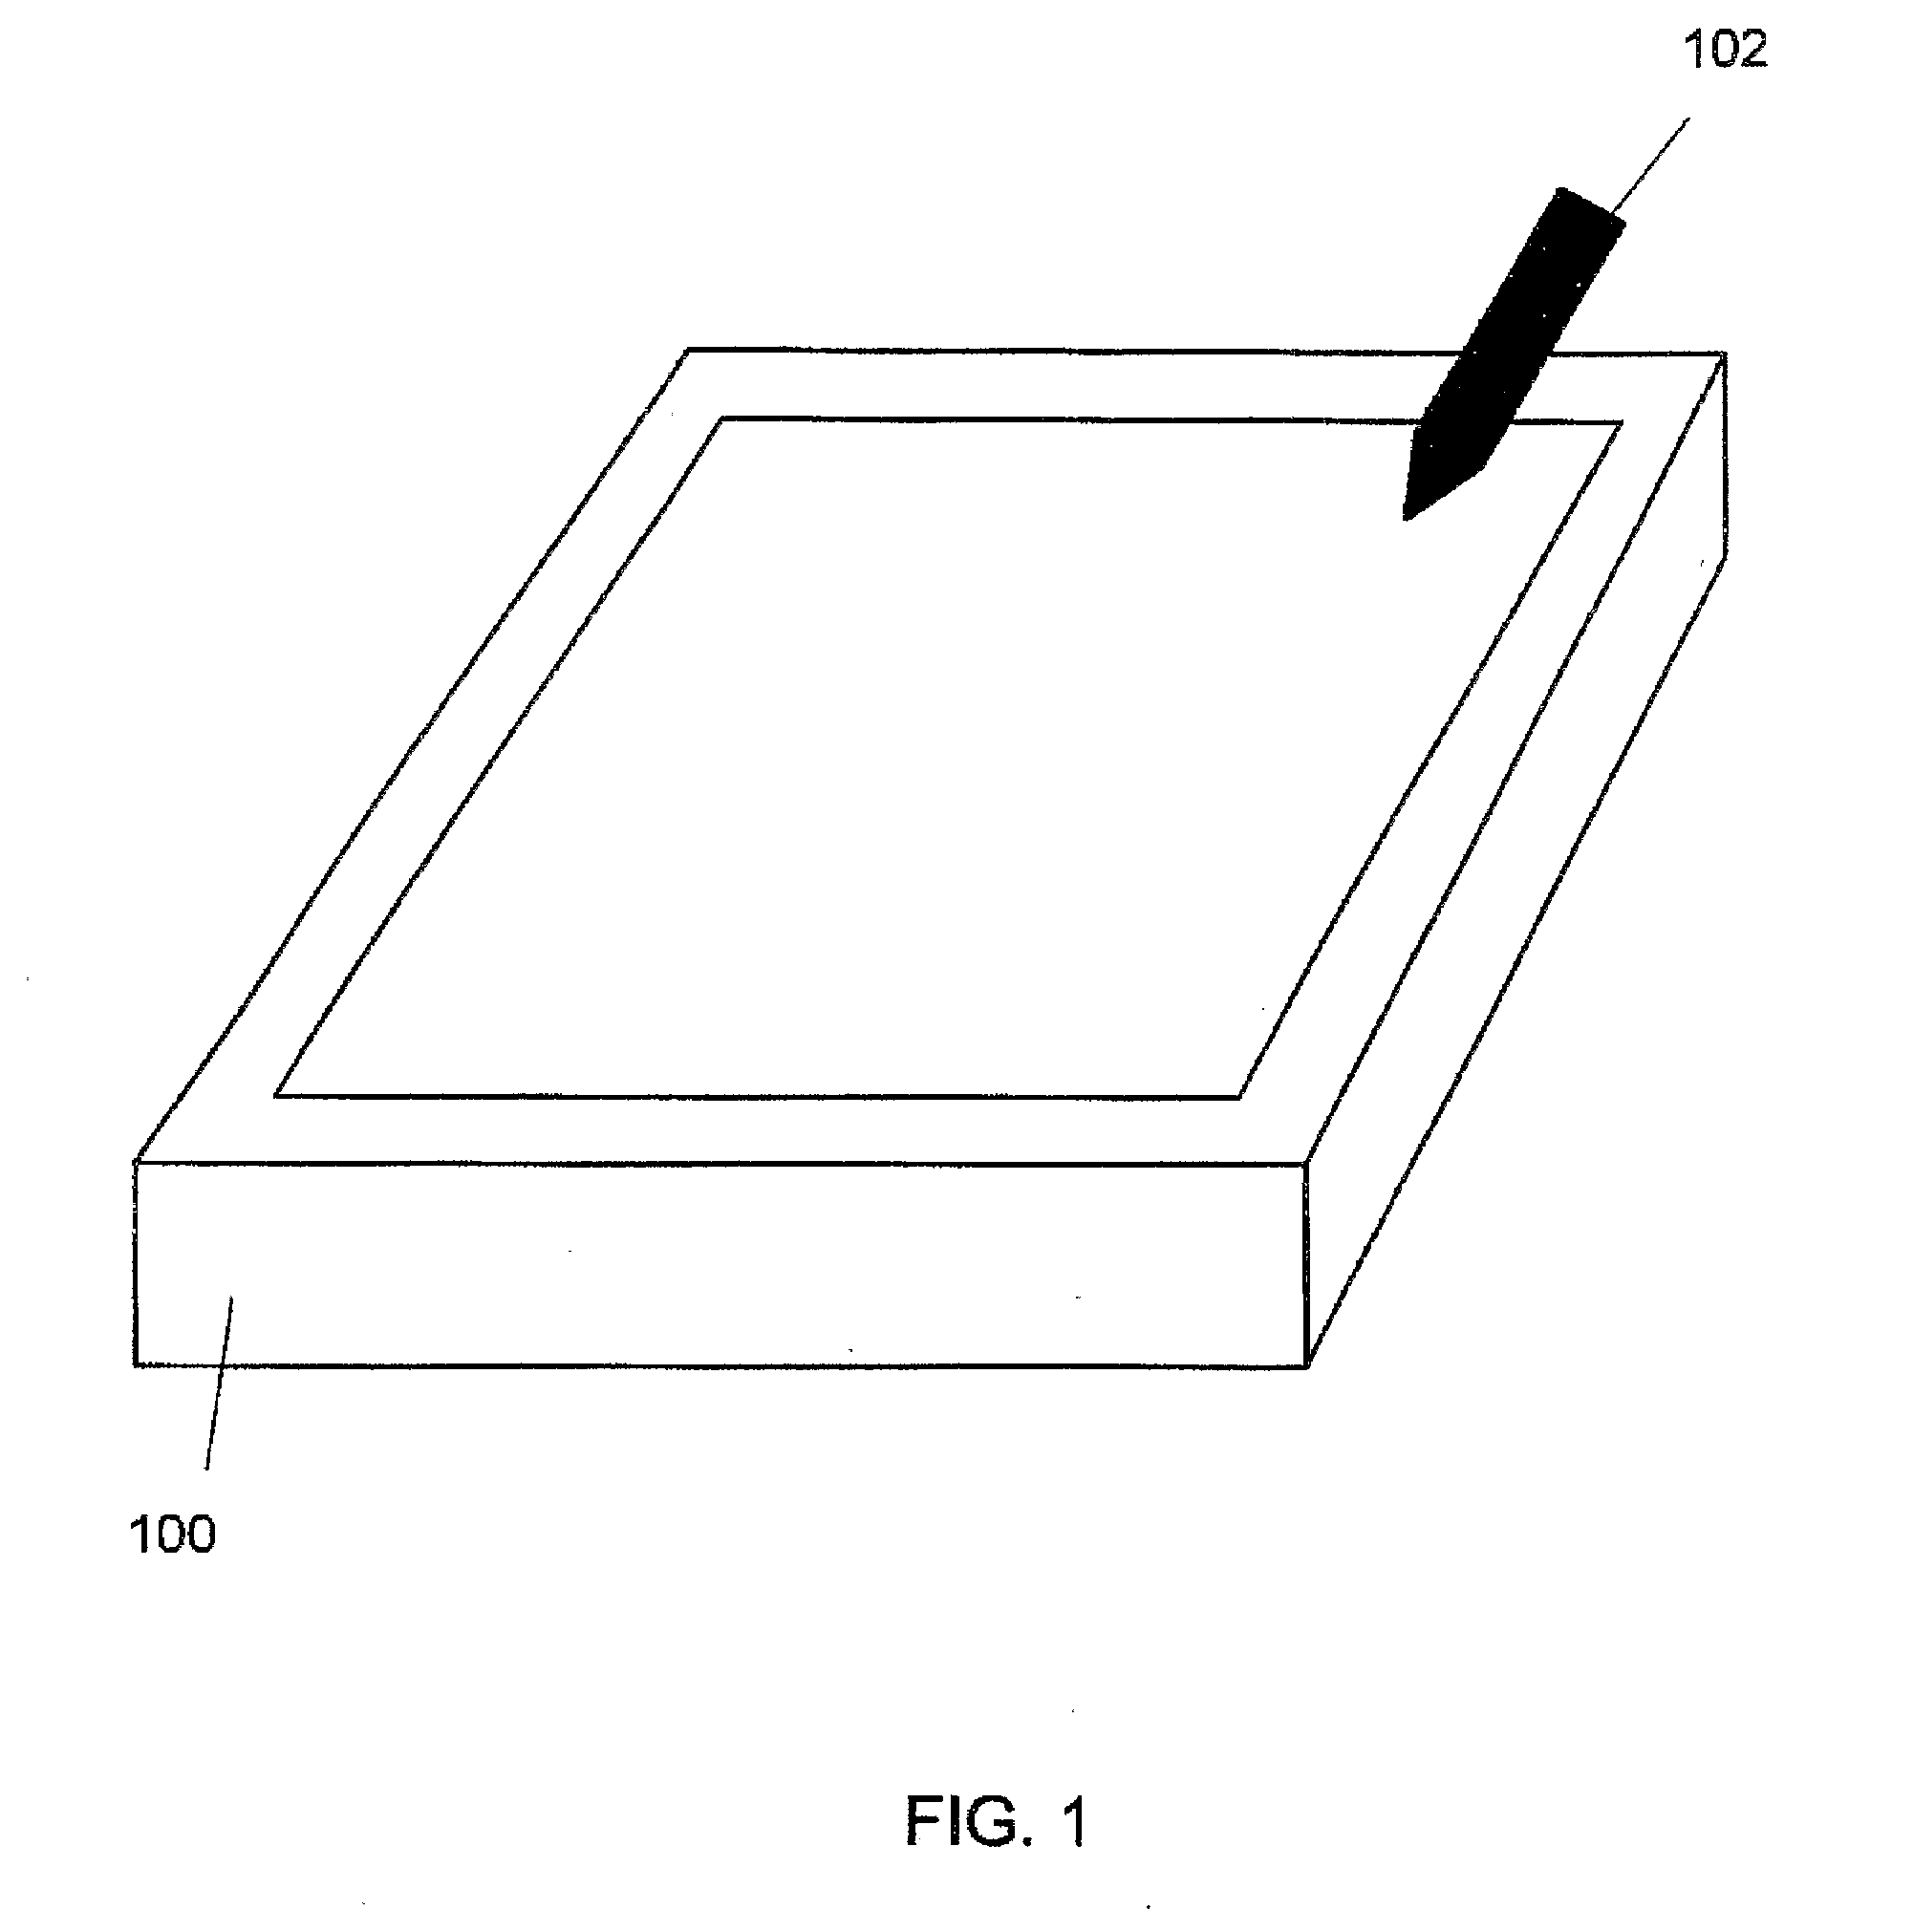 Position Detecting System and Apparatuses and Methods For Use and Control Thereof